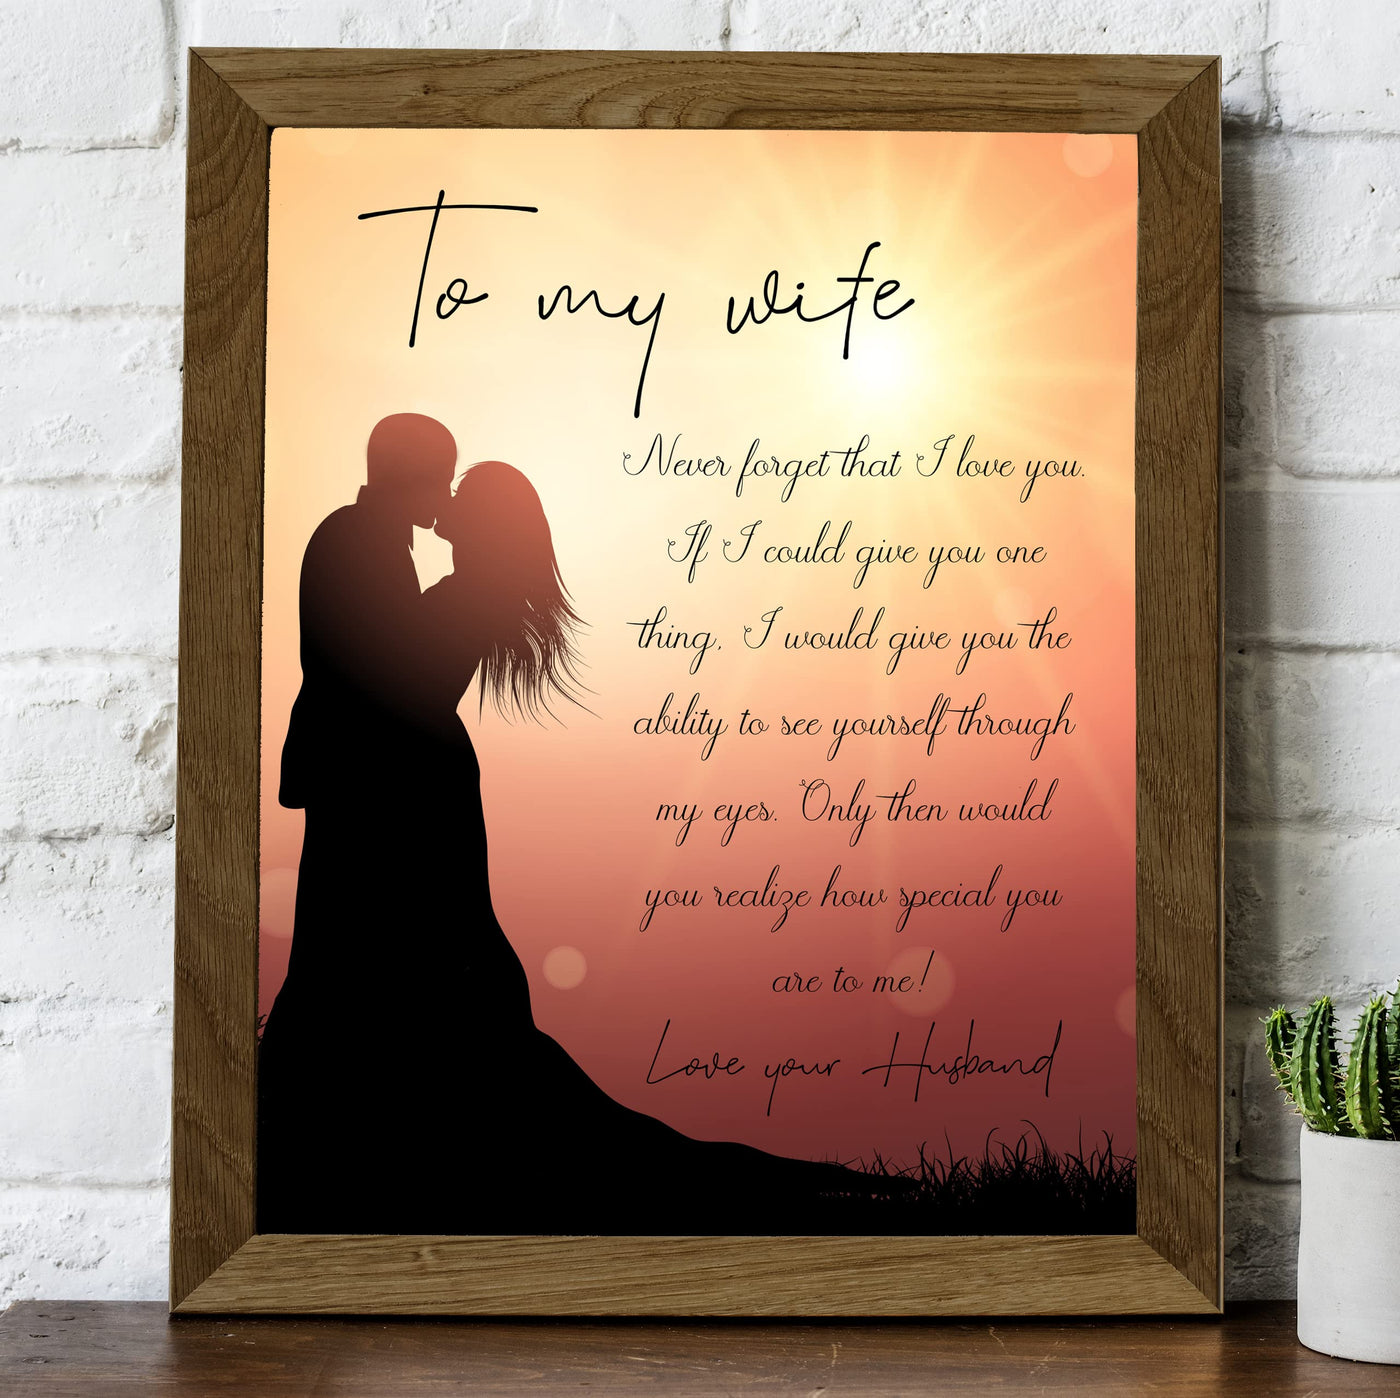 To My Wife-Never Forget I Love You Marriage Quotes Wall Art Decor -8 x10" Sunset Picture w/Couple Silhouette Image -Ready to Frame. Perfect for Spouses & Newlyweds. Great Wedding-Anniversary Gift!